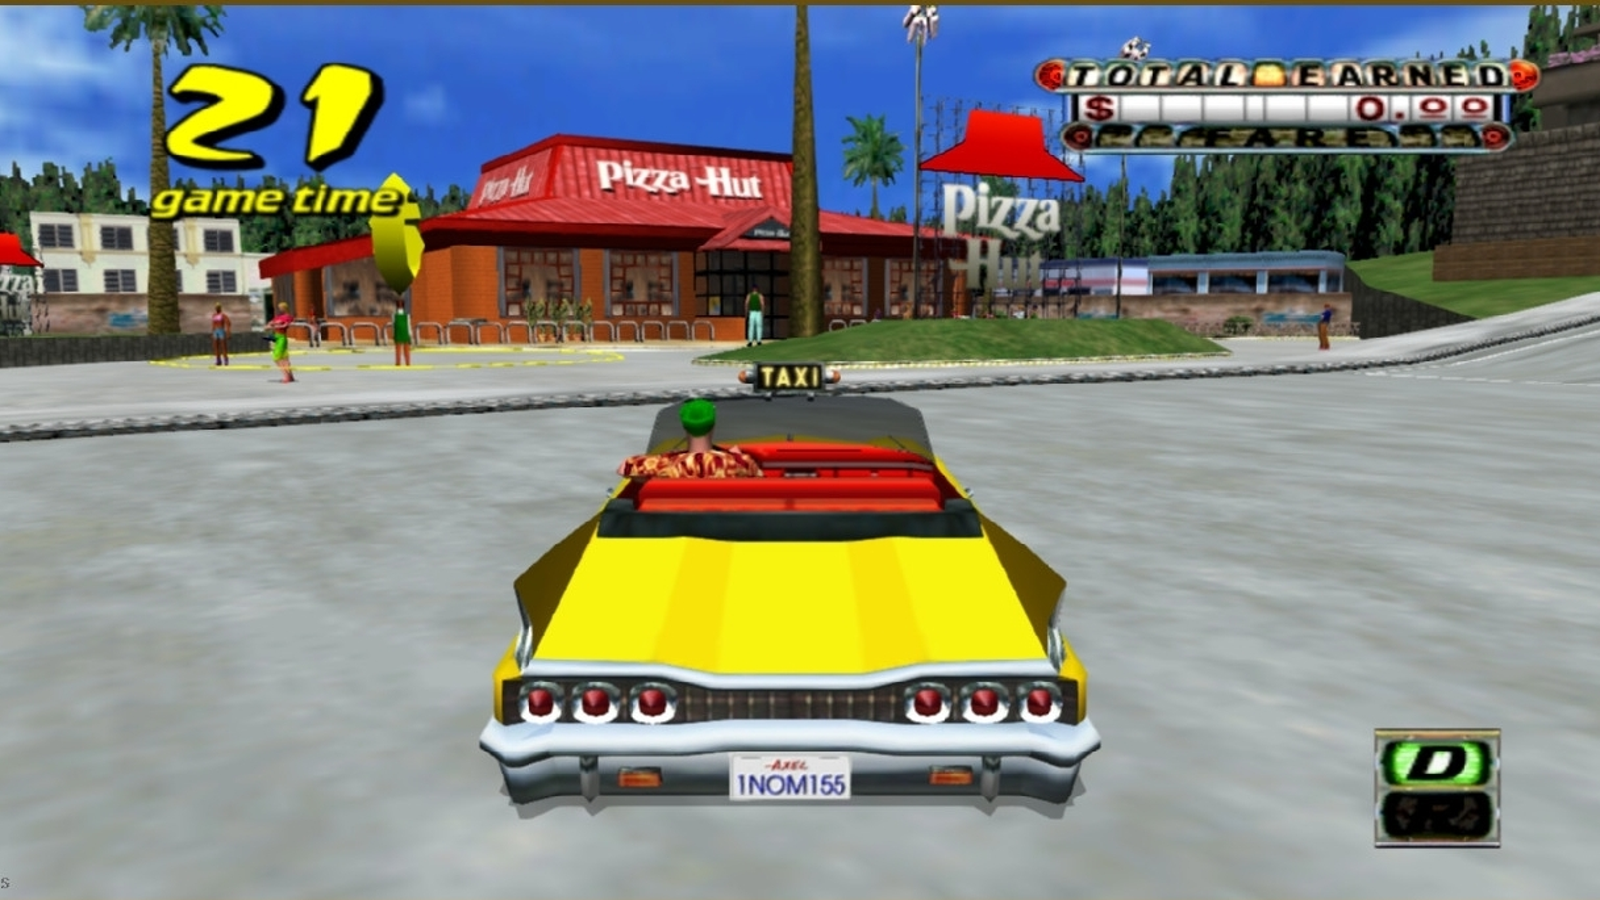 Crazy Taxi on Steam